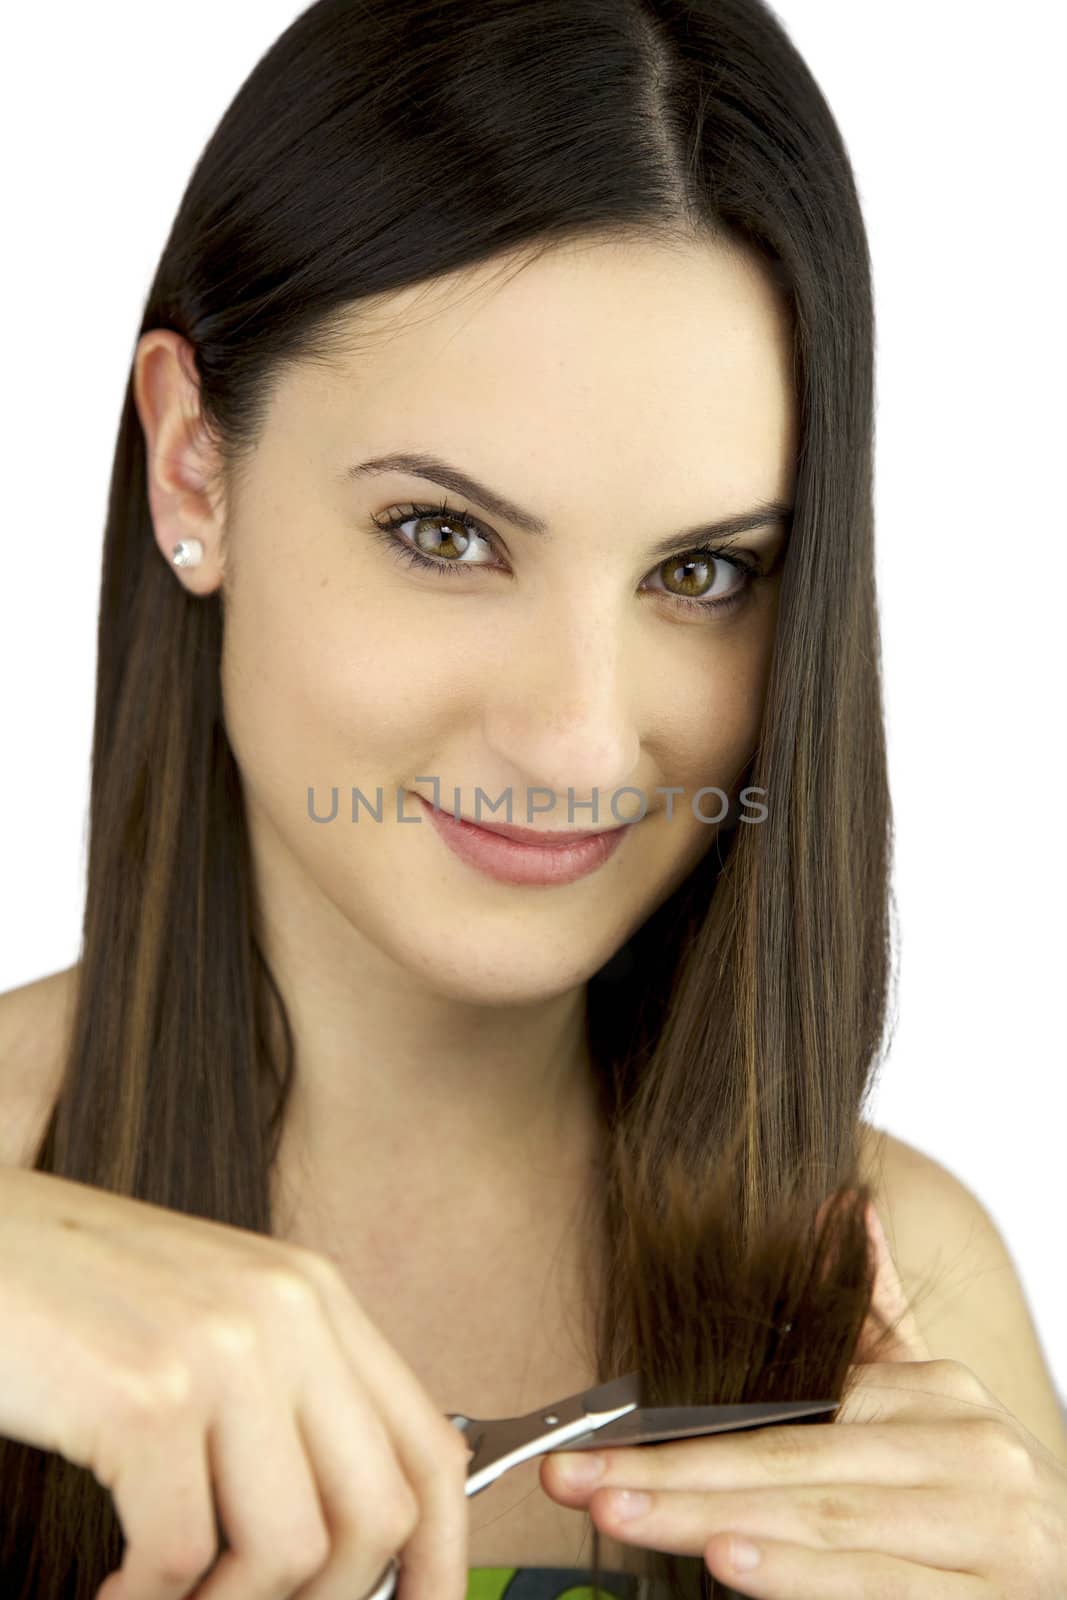 Young woman smiling cutting her split ends smiling by fmarsicano